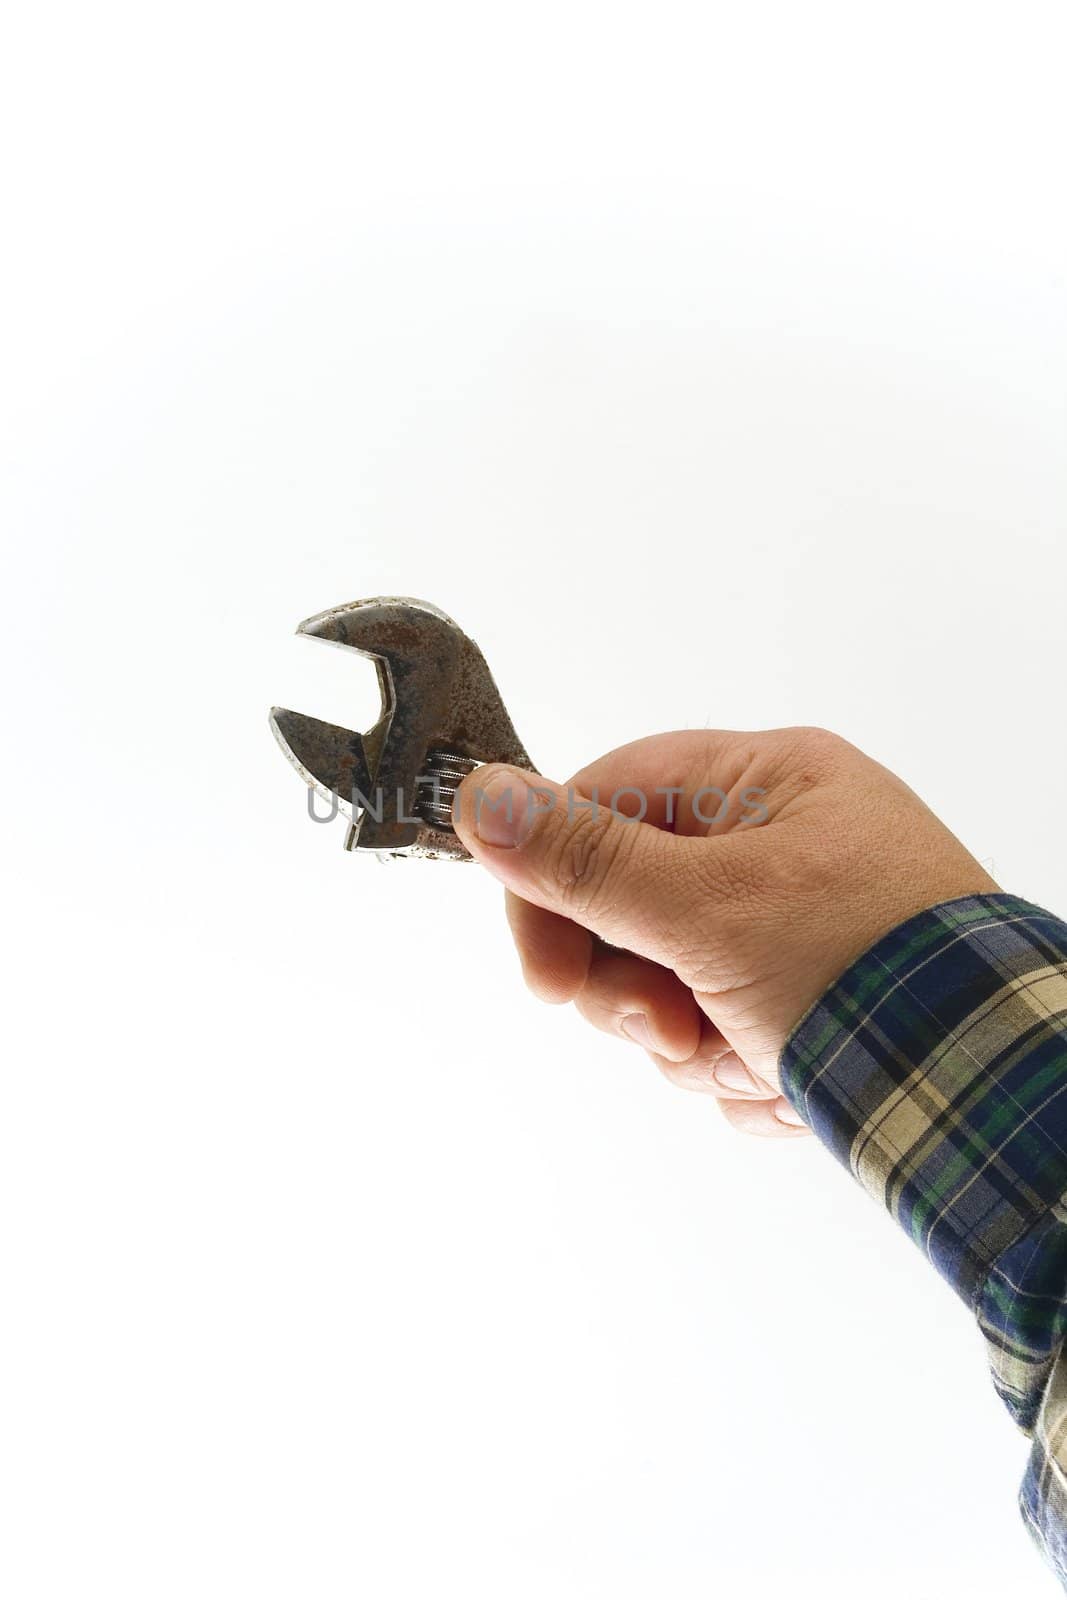 Hand with wrench by Vladimir